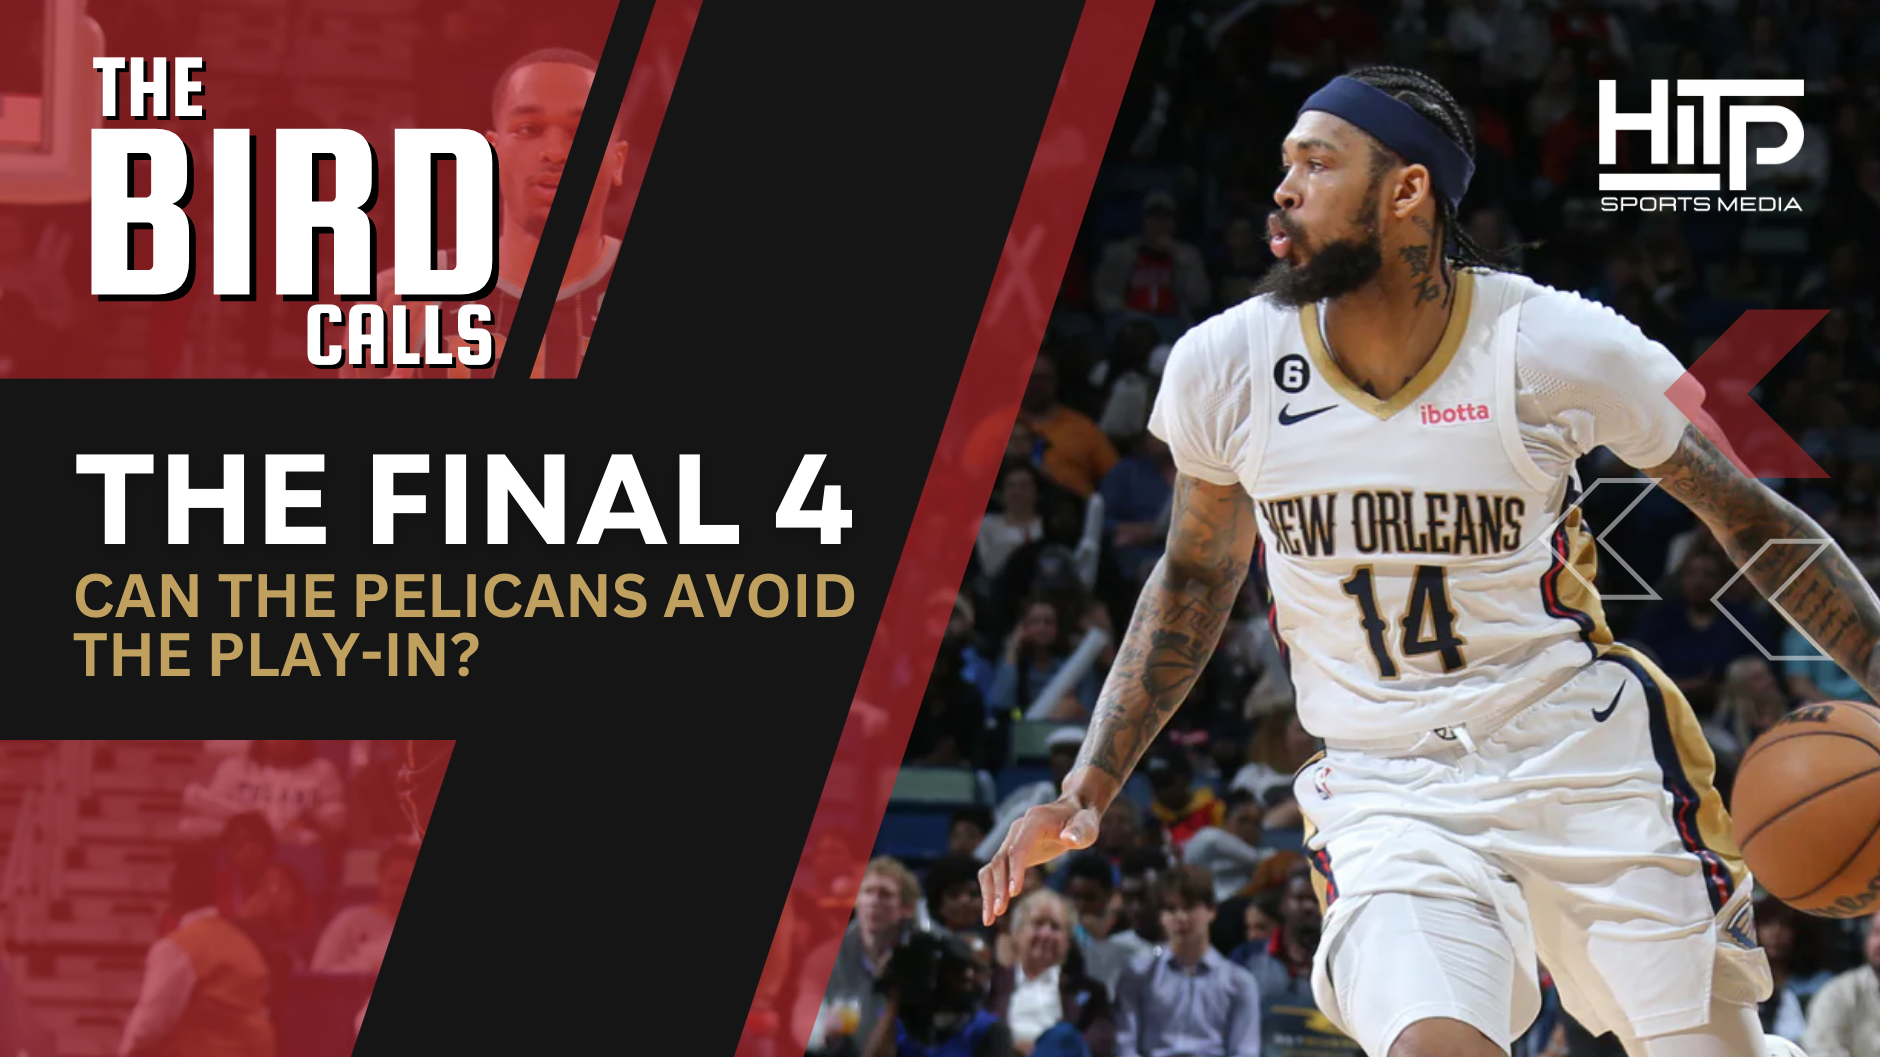 The Bird Calls: The Final 4 – Can The Pelicans Avoid The Play-In?